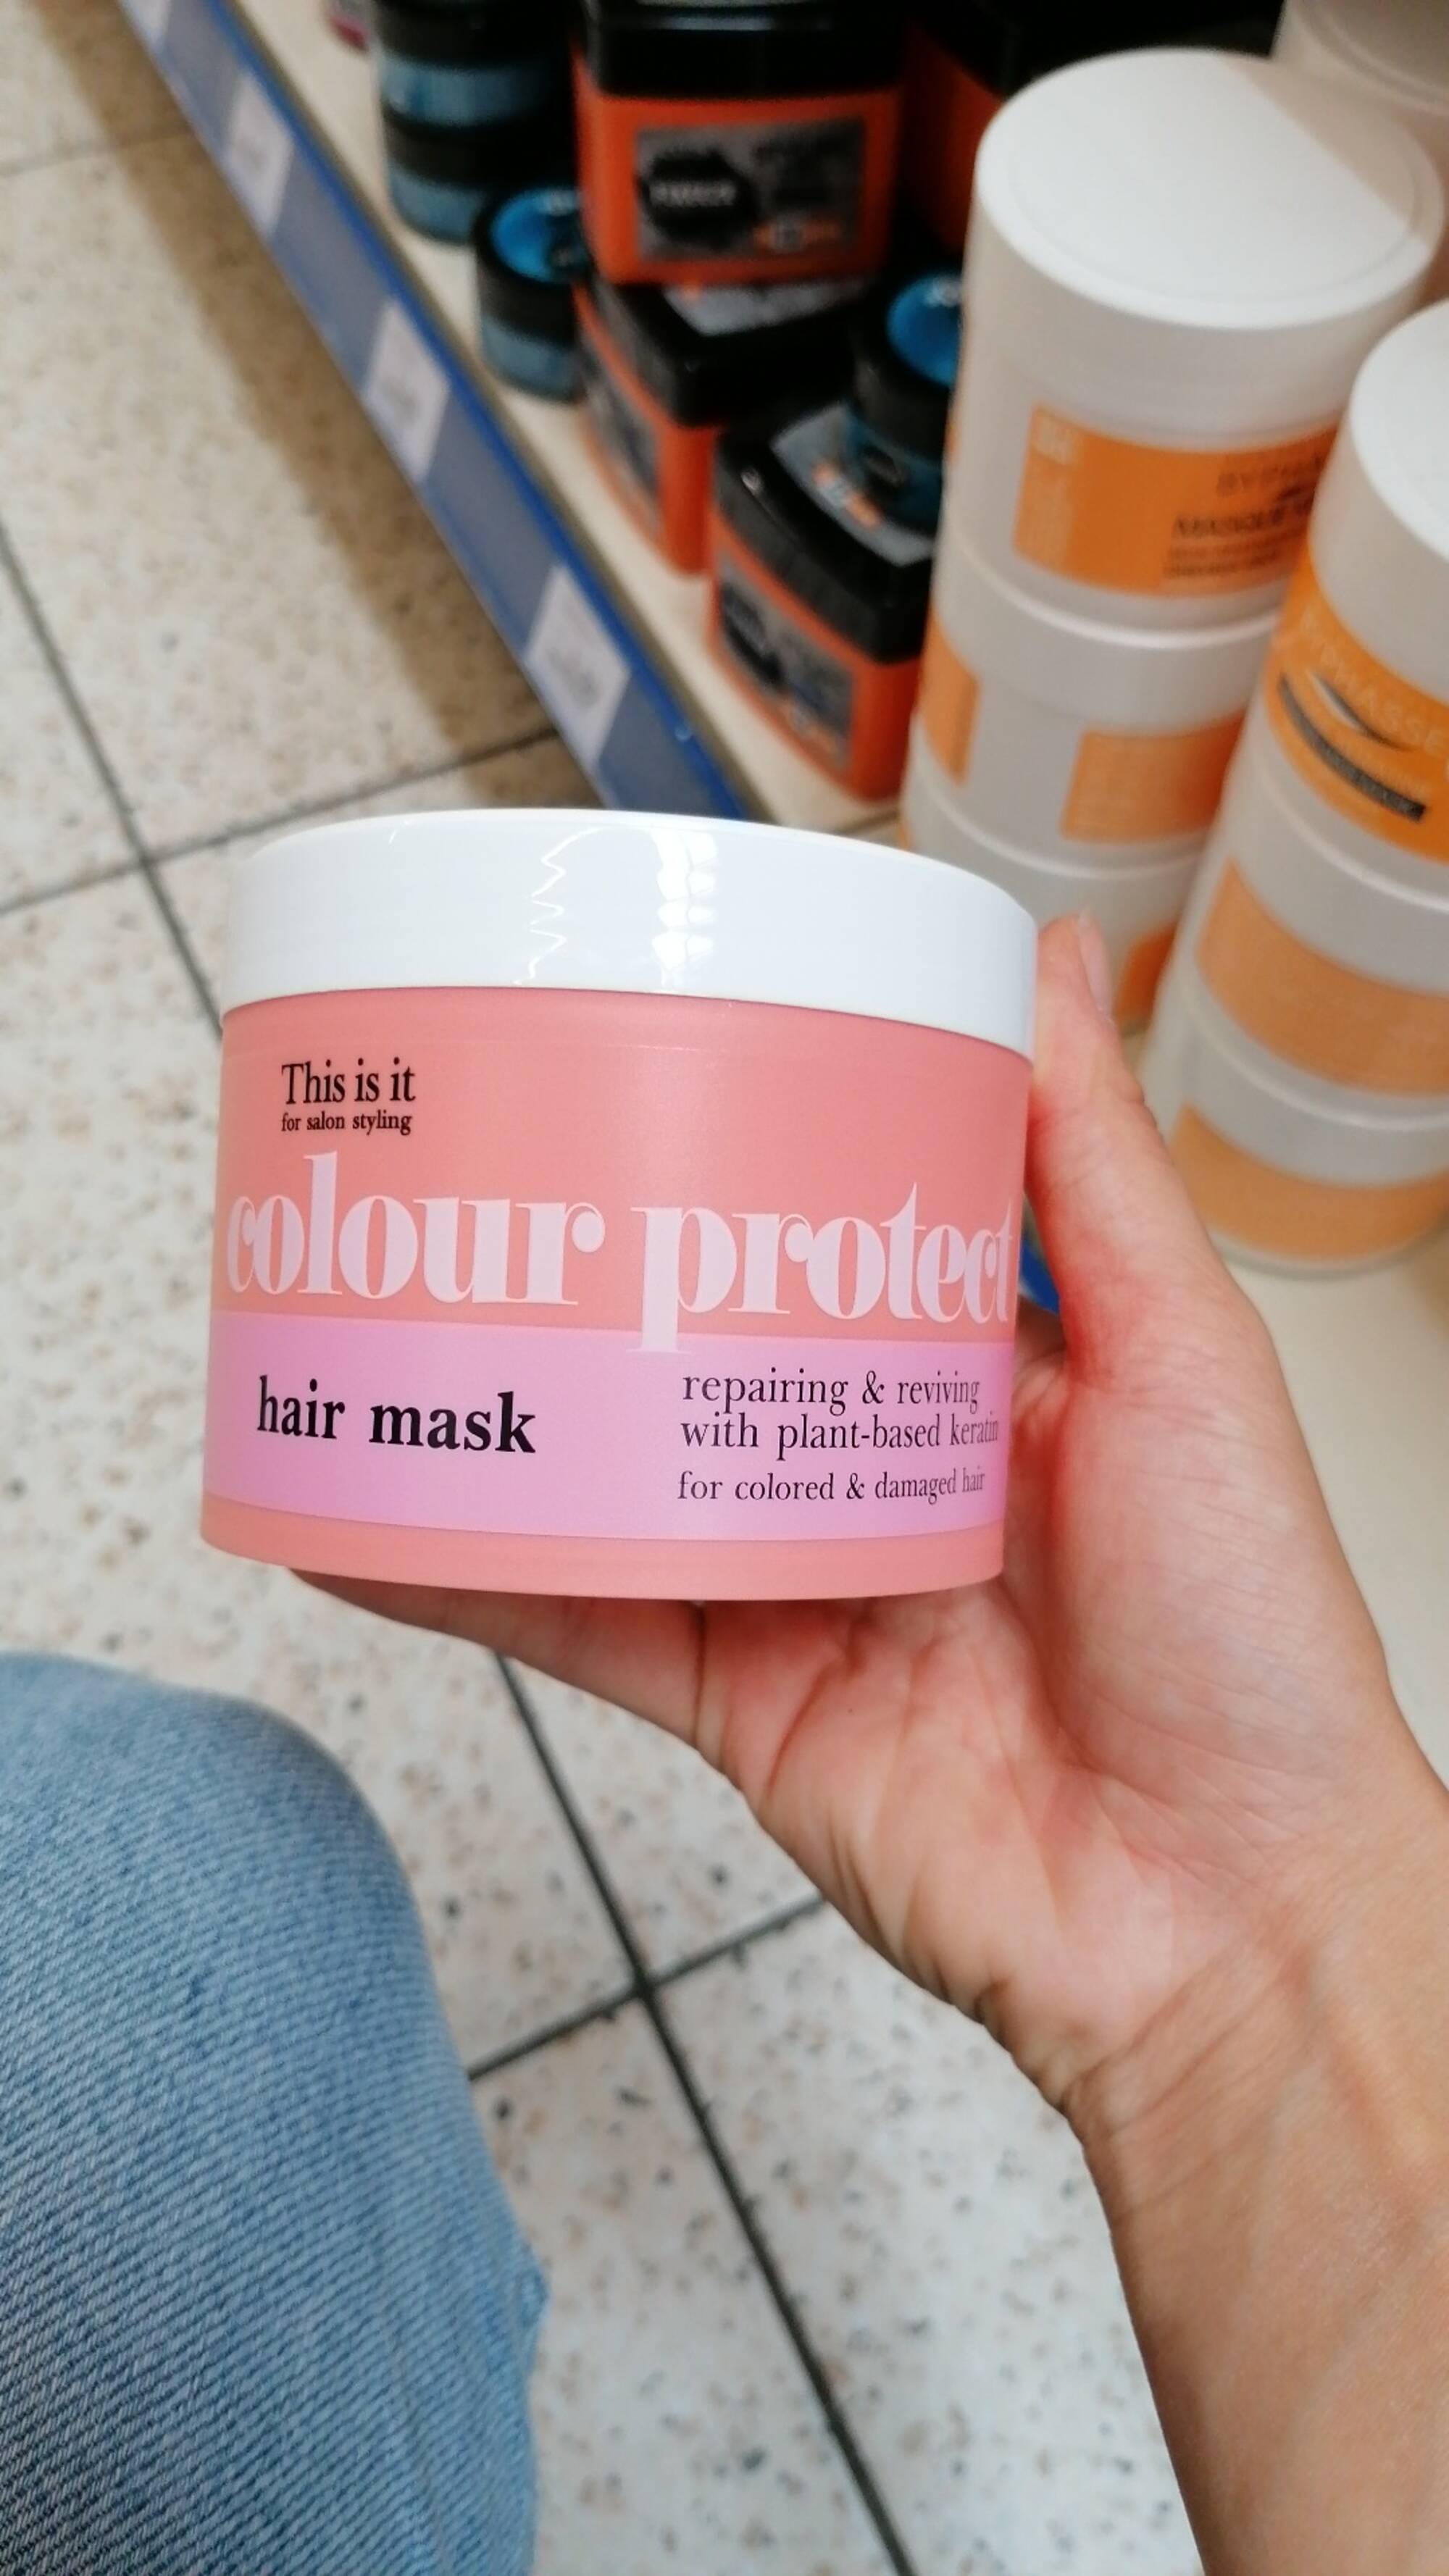 THIS IS IT - Colour protect - Hair mask 